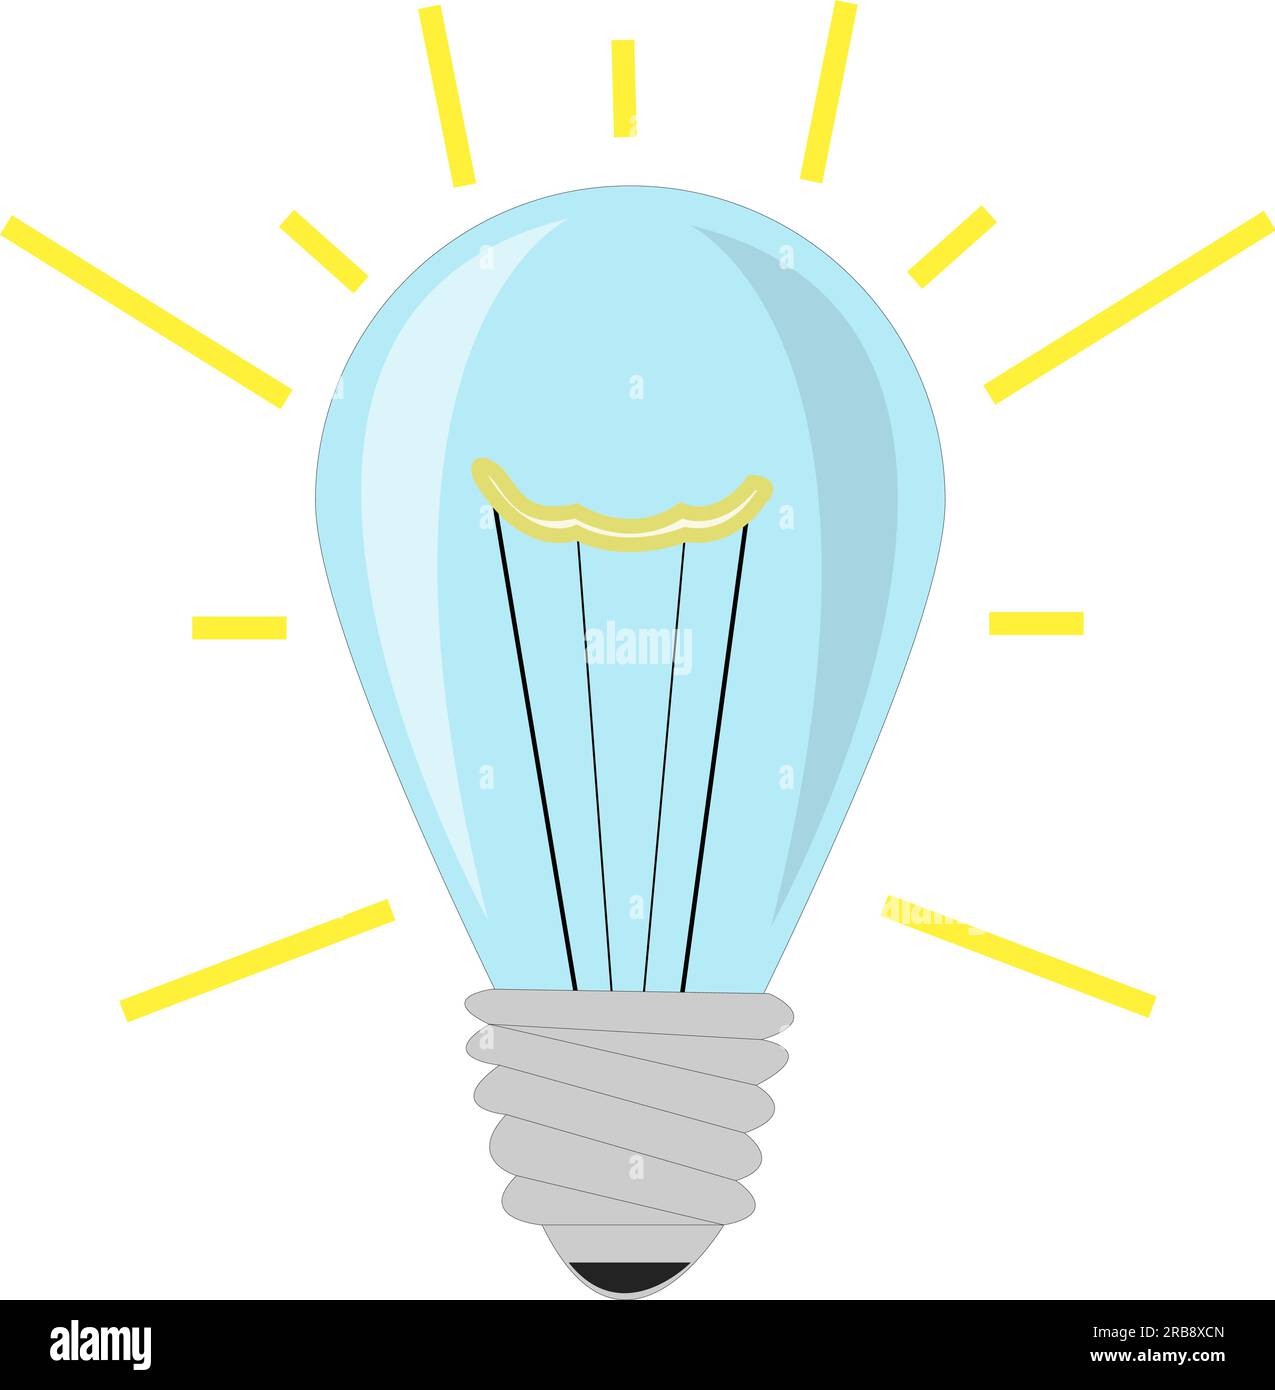 blue light bulb icon with yellow glow, vector illustration Stock Vector